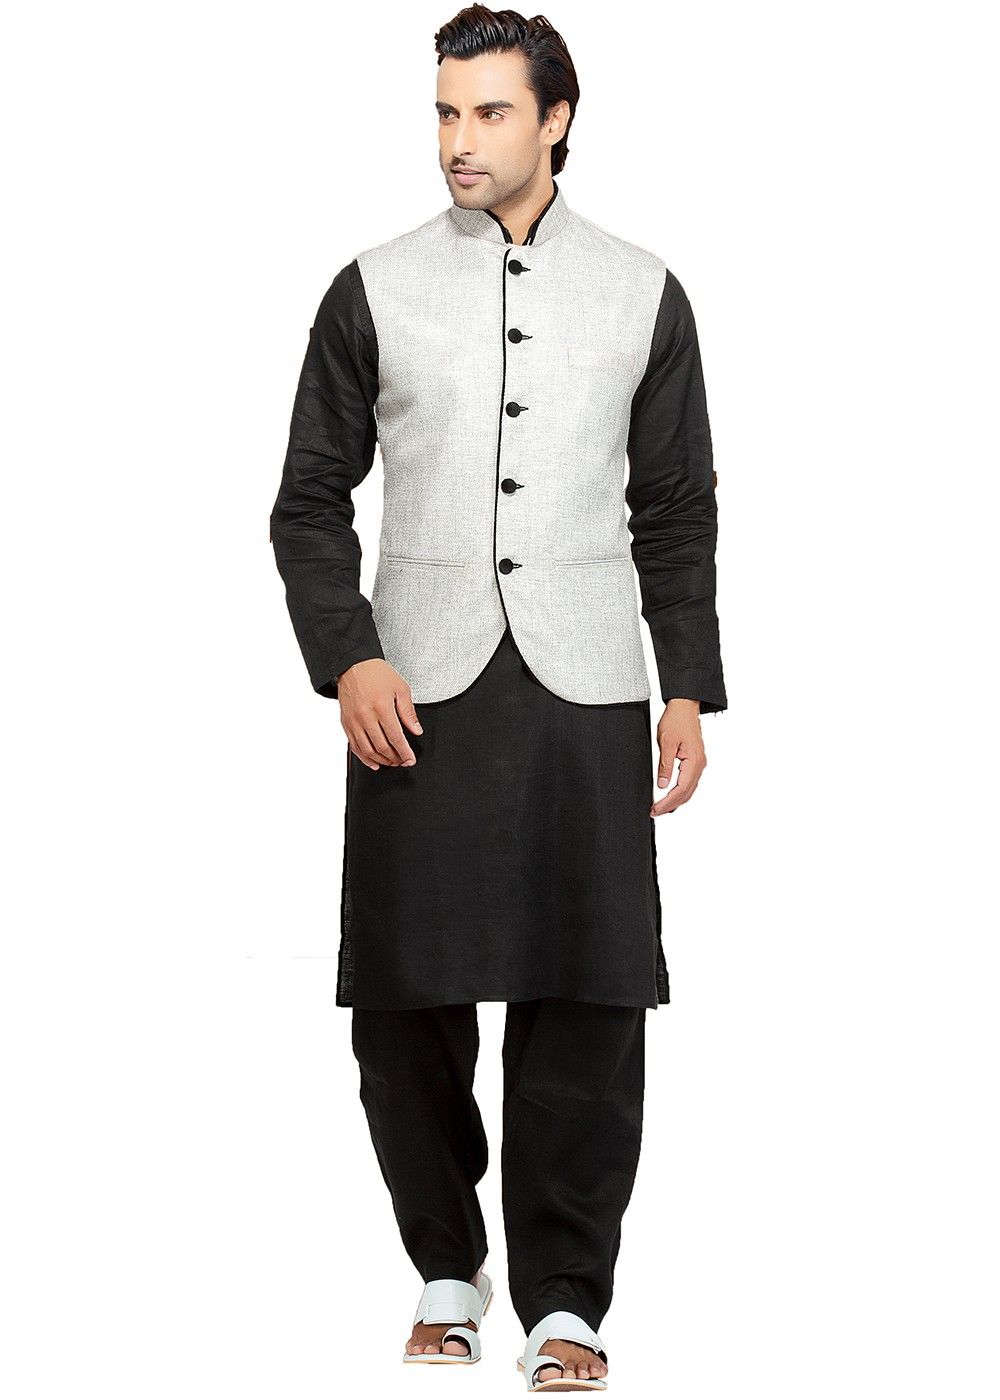 Buy PATHANI SUIT Online In India - Etsy India